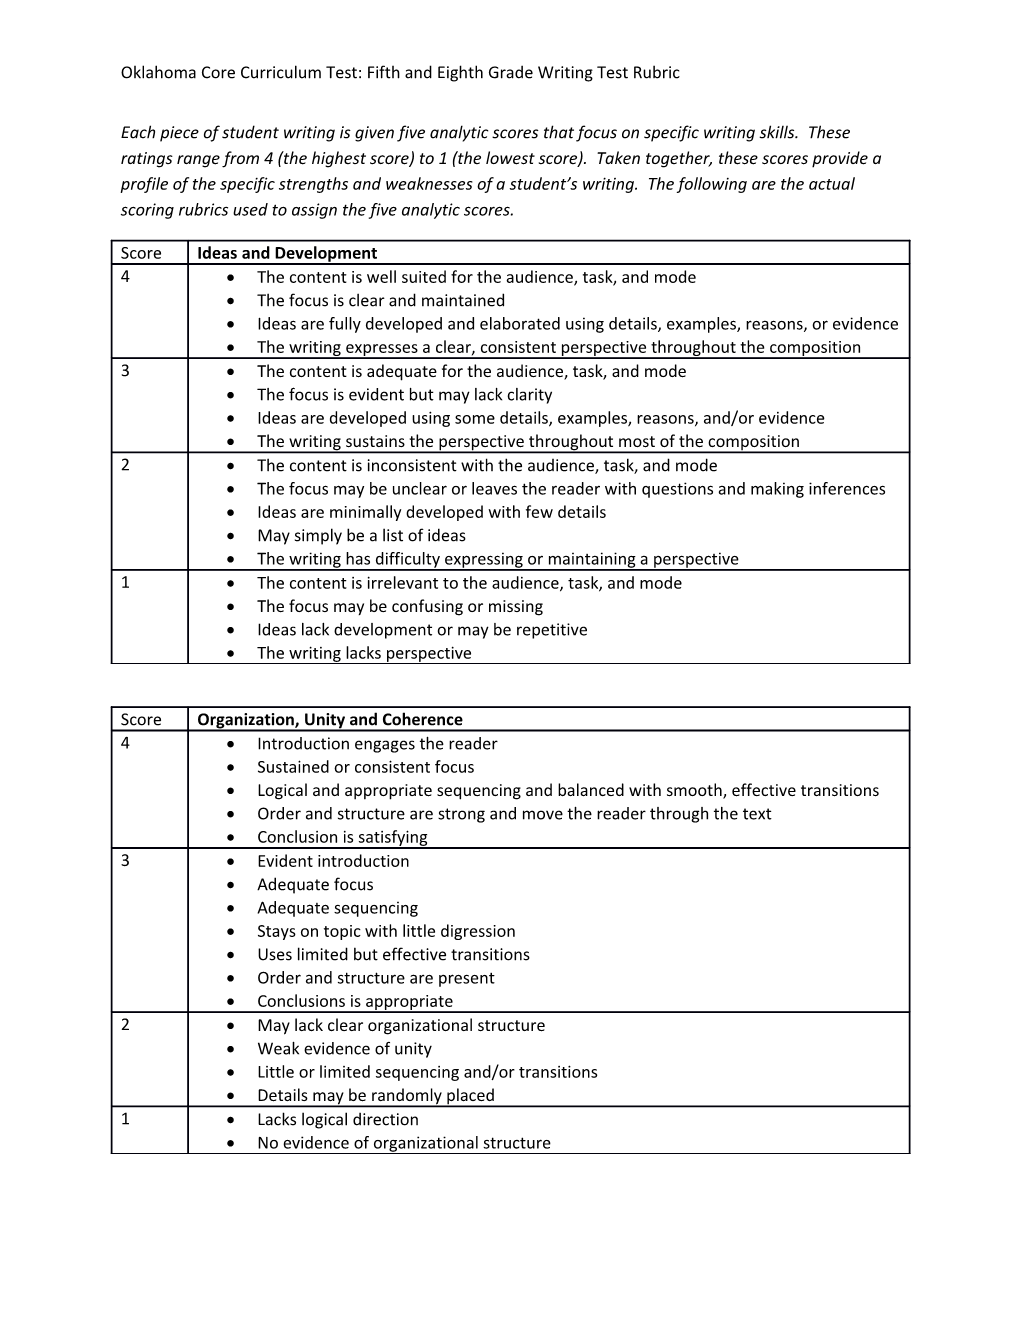 Oklahoma Core Curriculum Test: Fifth and Eighth Grade Writing Test Rubric